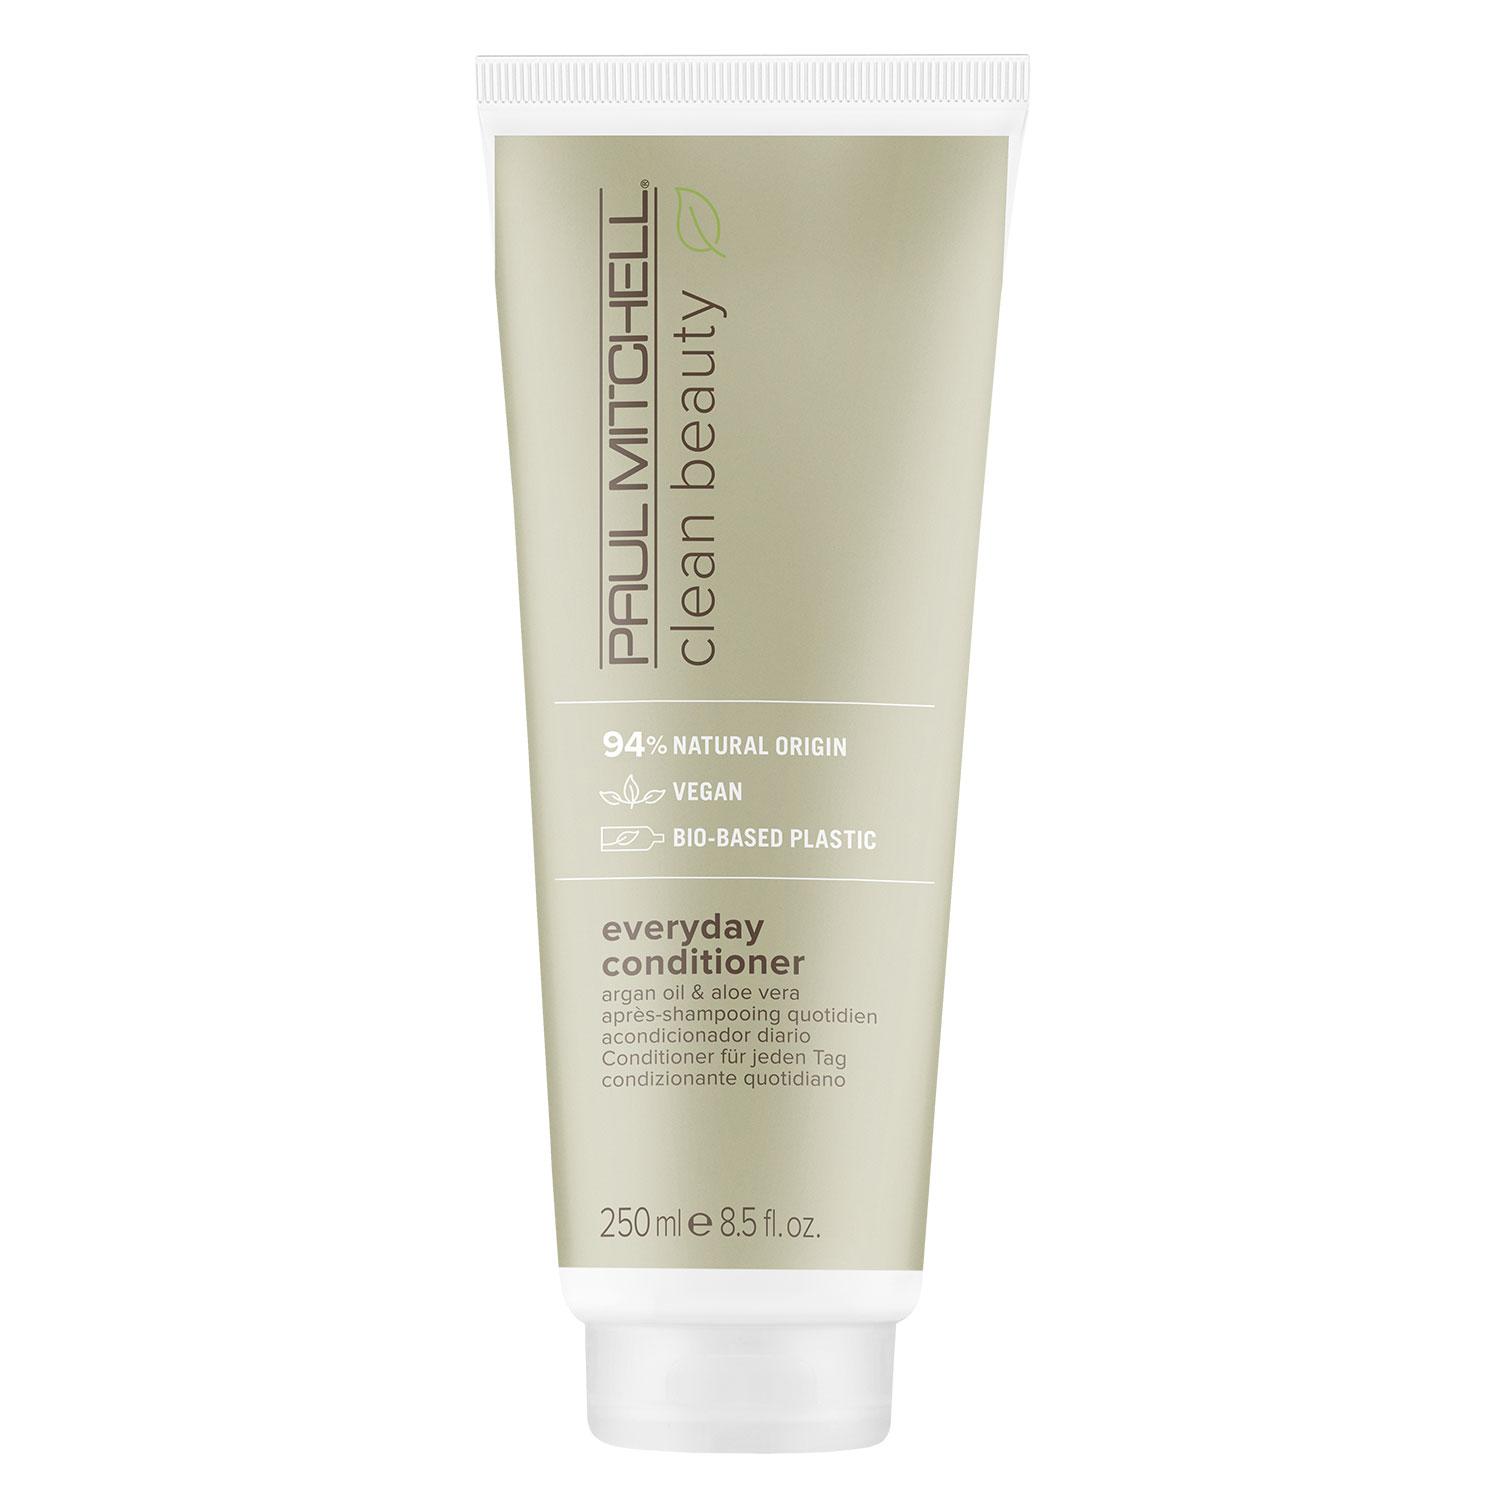 Paul Mitchell Clean Beauty - Everyday Conditioner